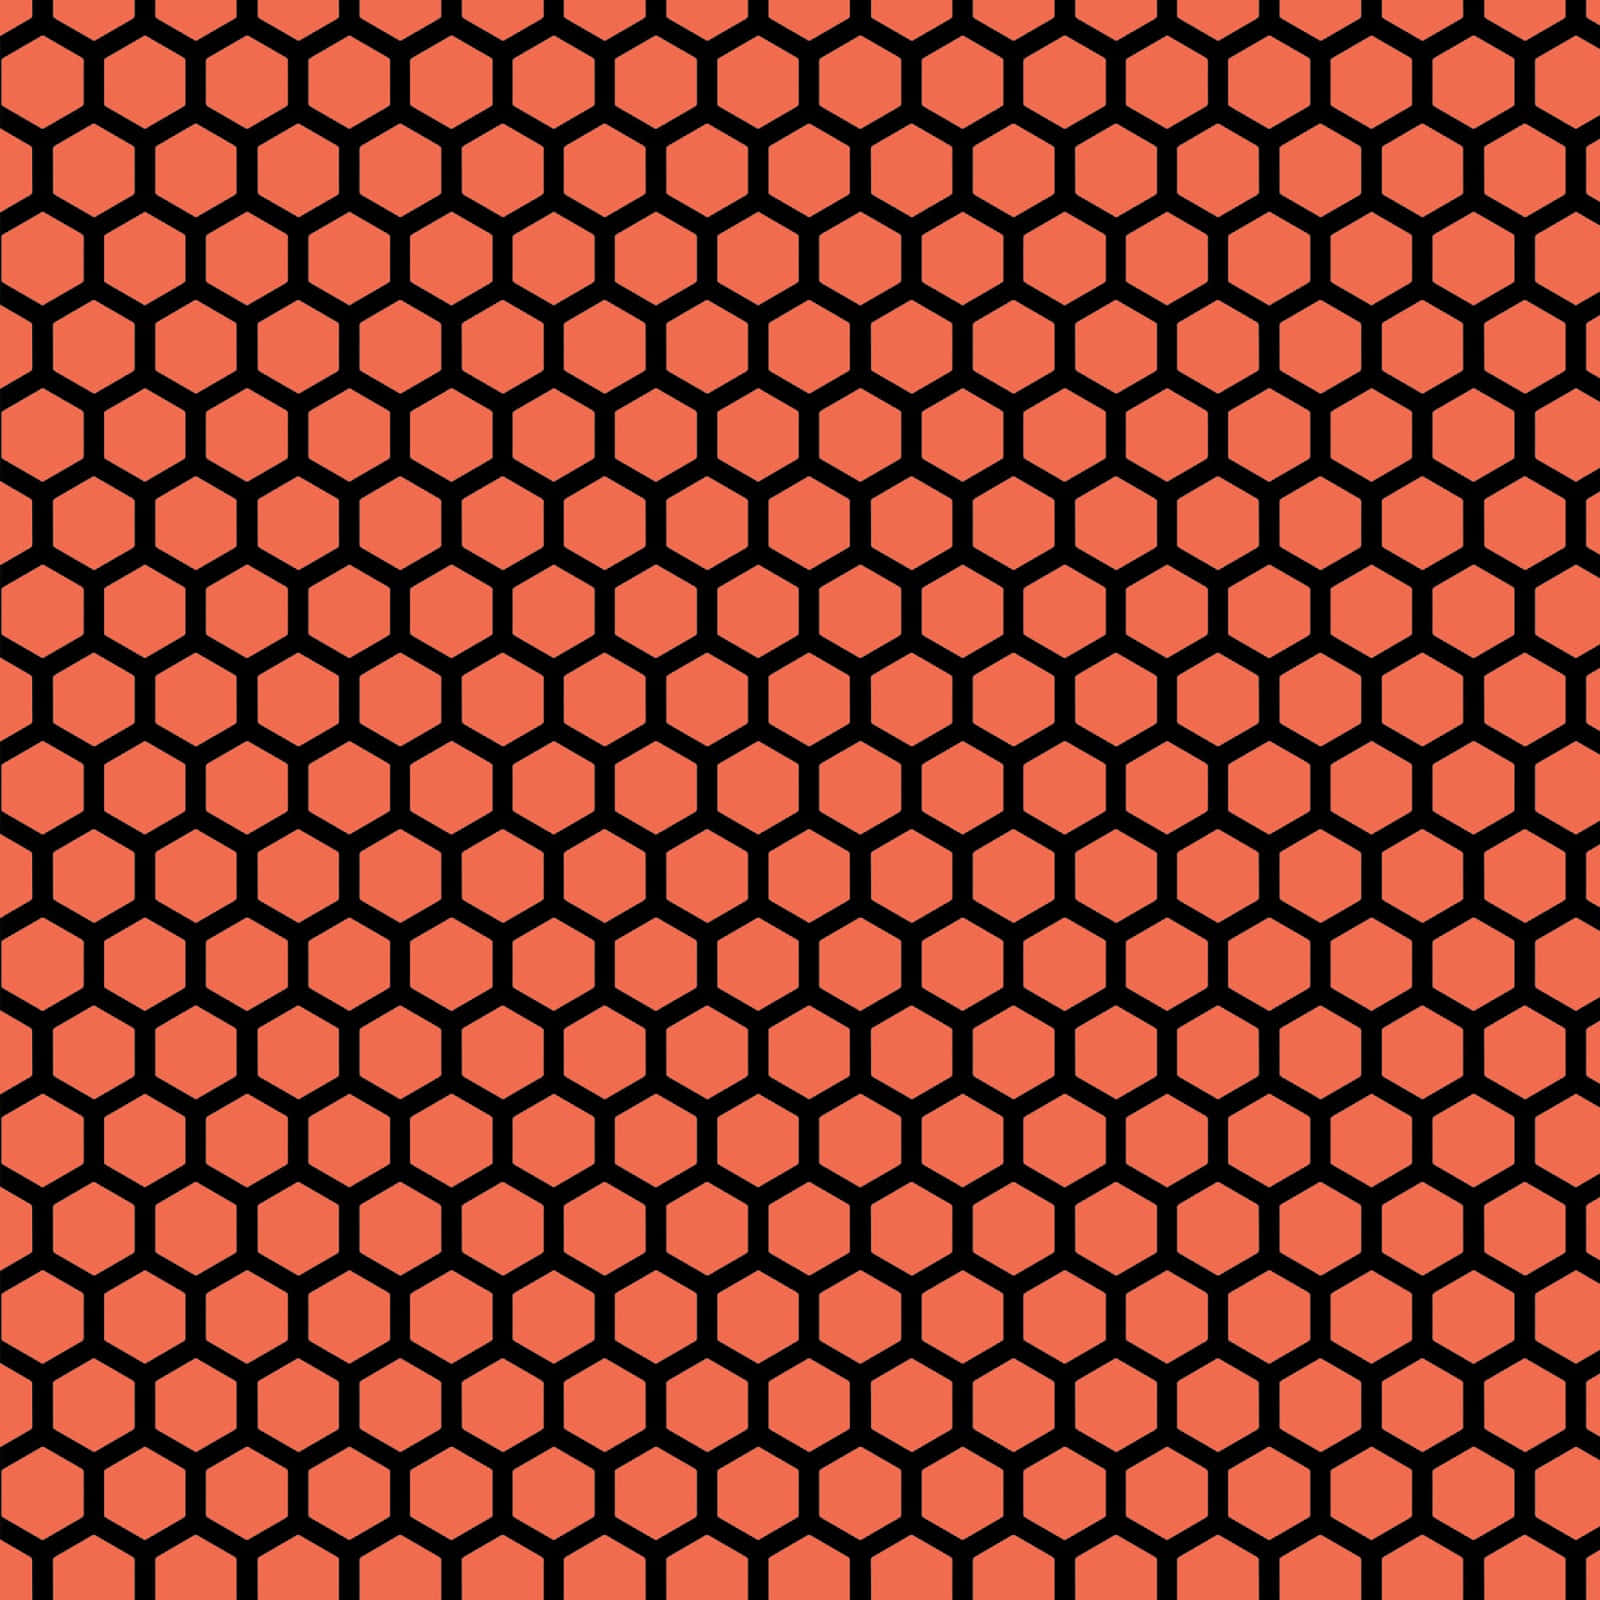 "The detailed pattern of a honeycomb reveals the complexity of nature"